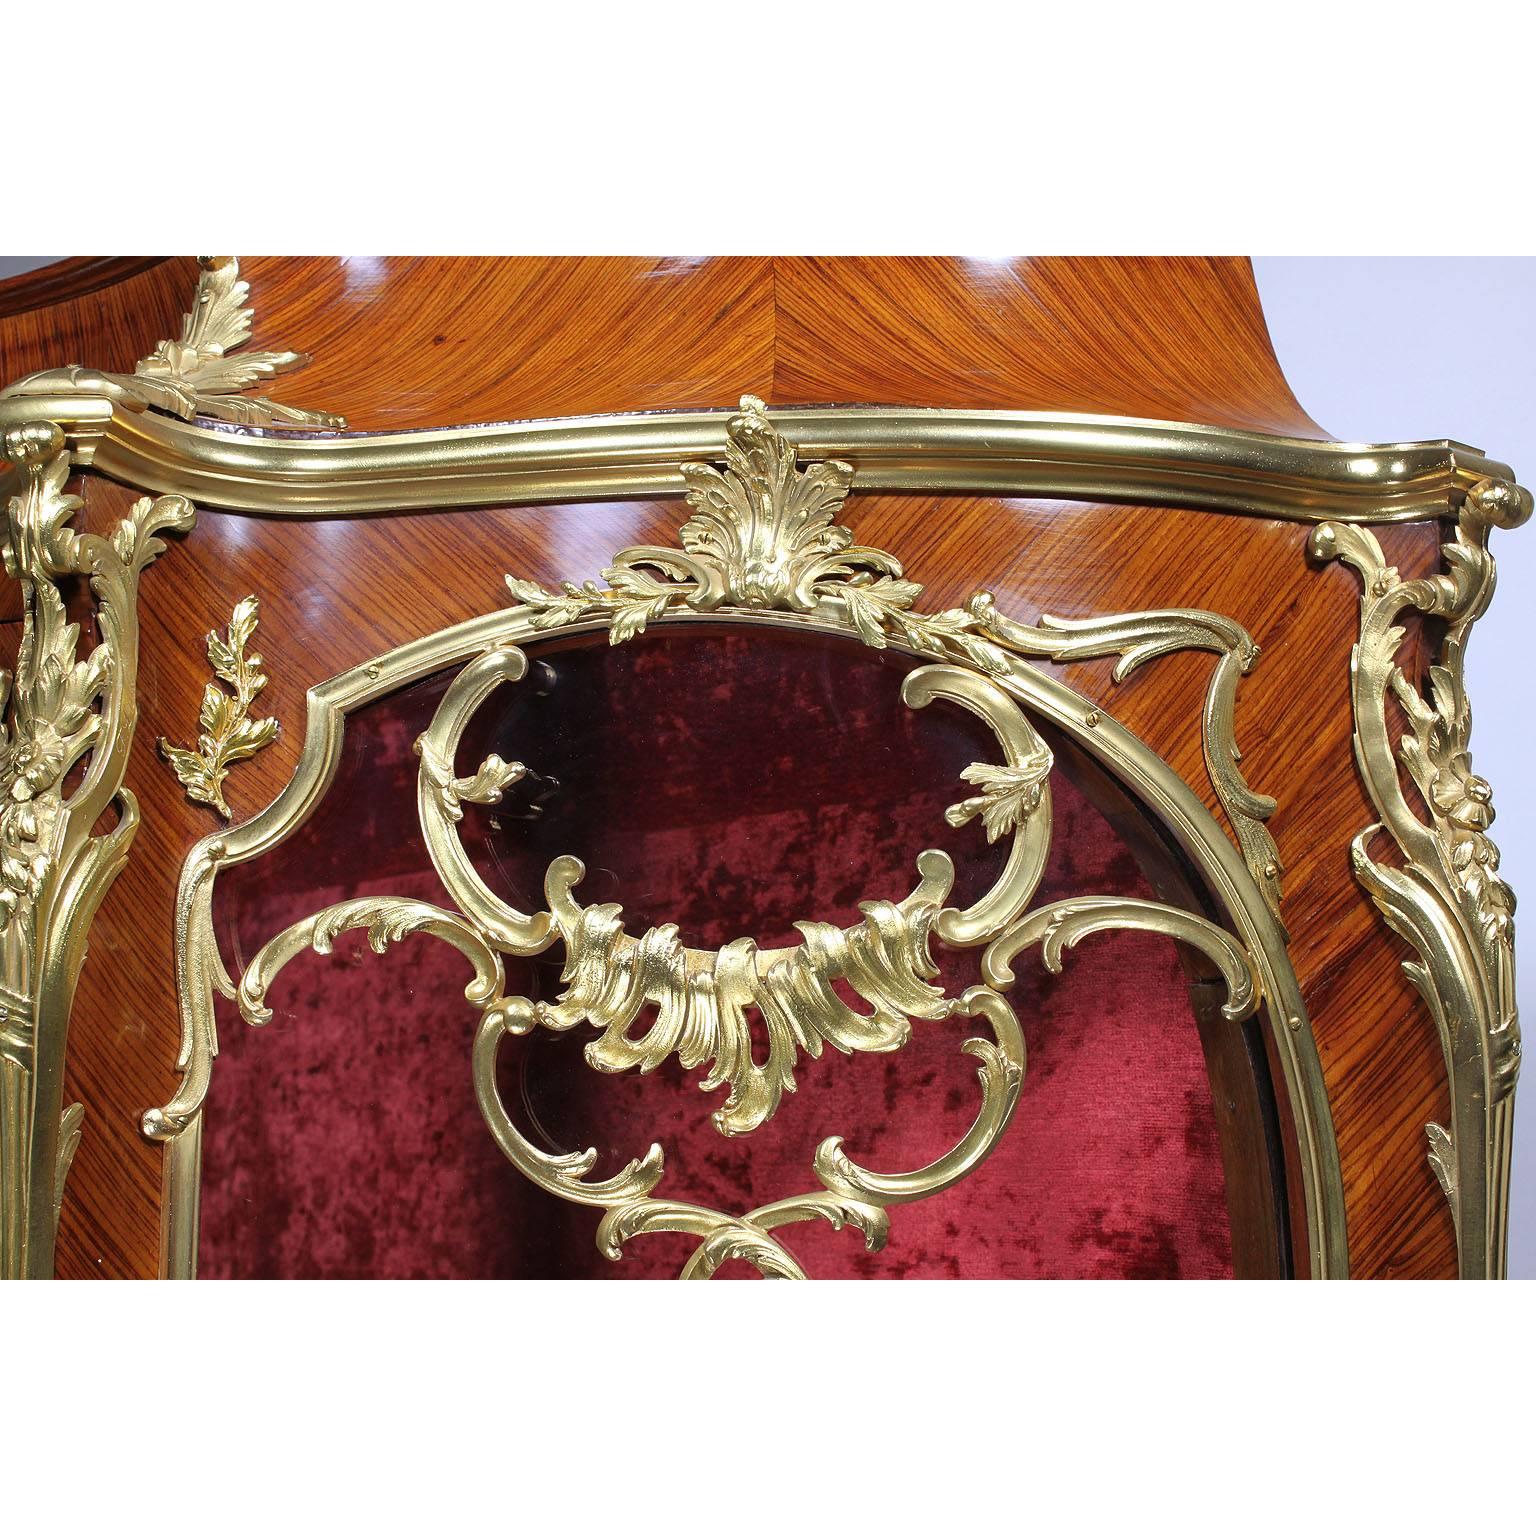 French 19th-20th Century Louis XV Style Kingwood and Ormolu Mounted Vitrine For Sale 2